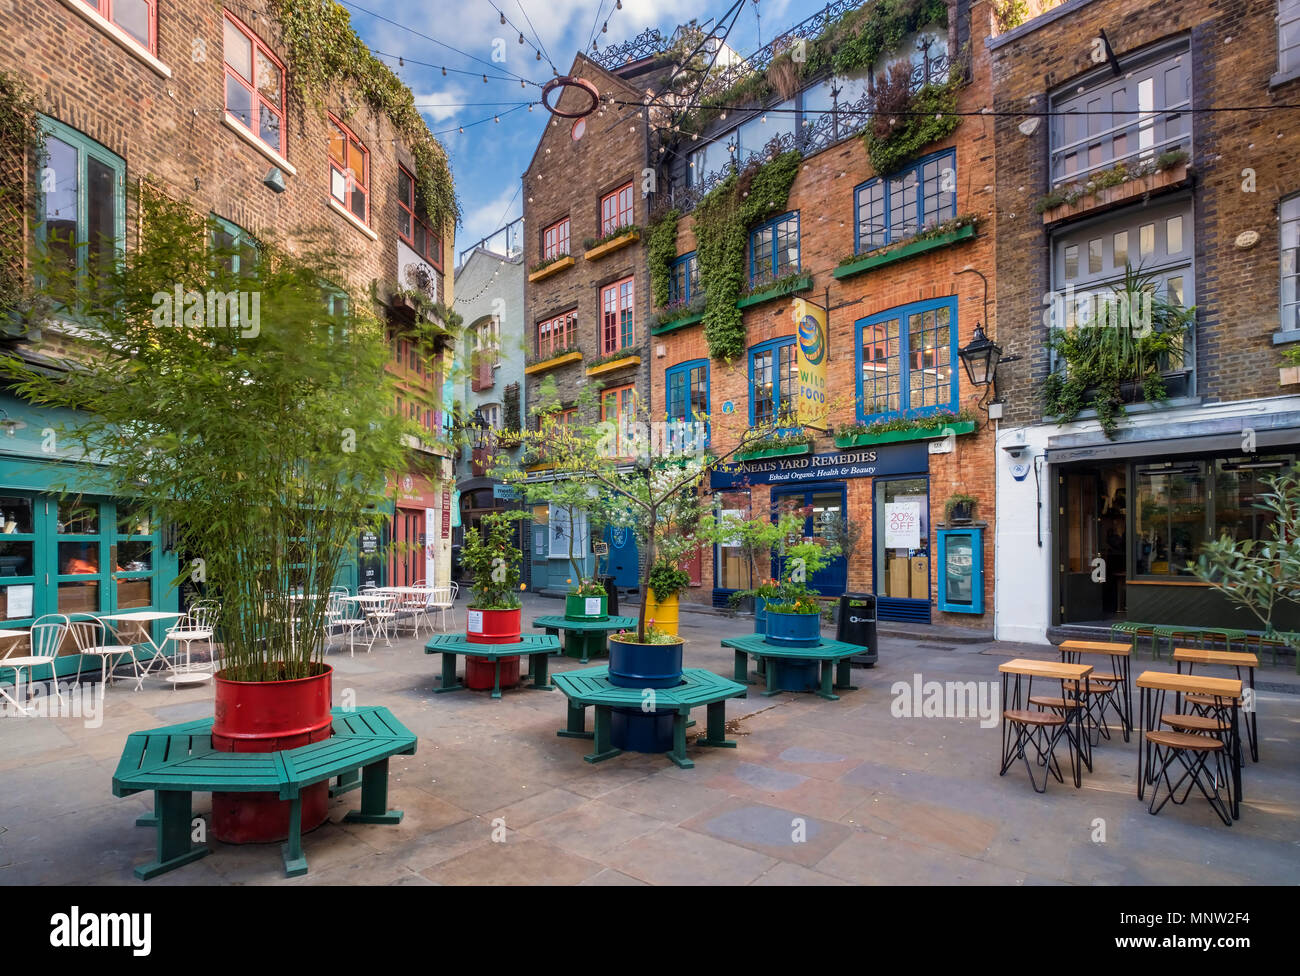 Neal's Yard, Covent Garden, London, England, UK Banque D'Images